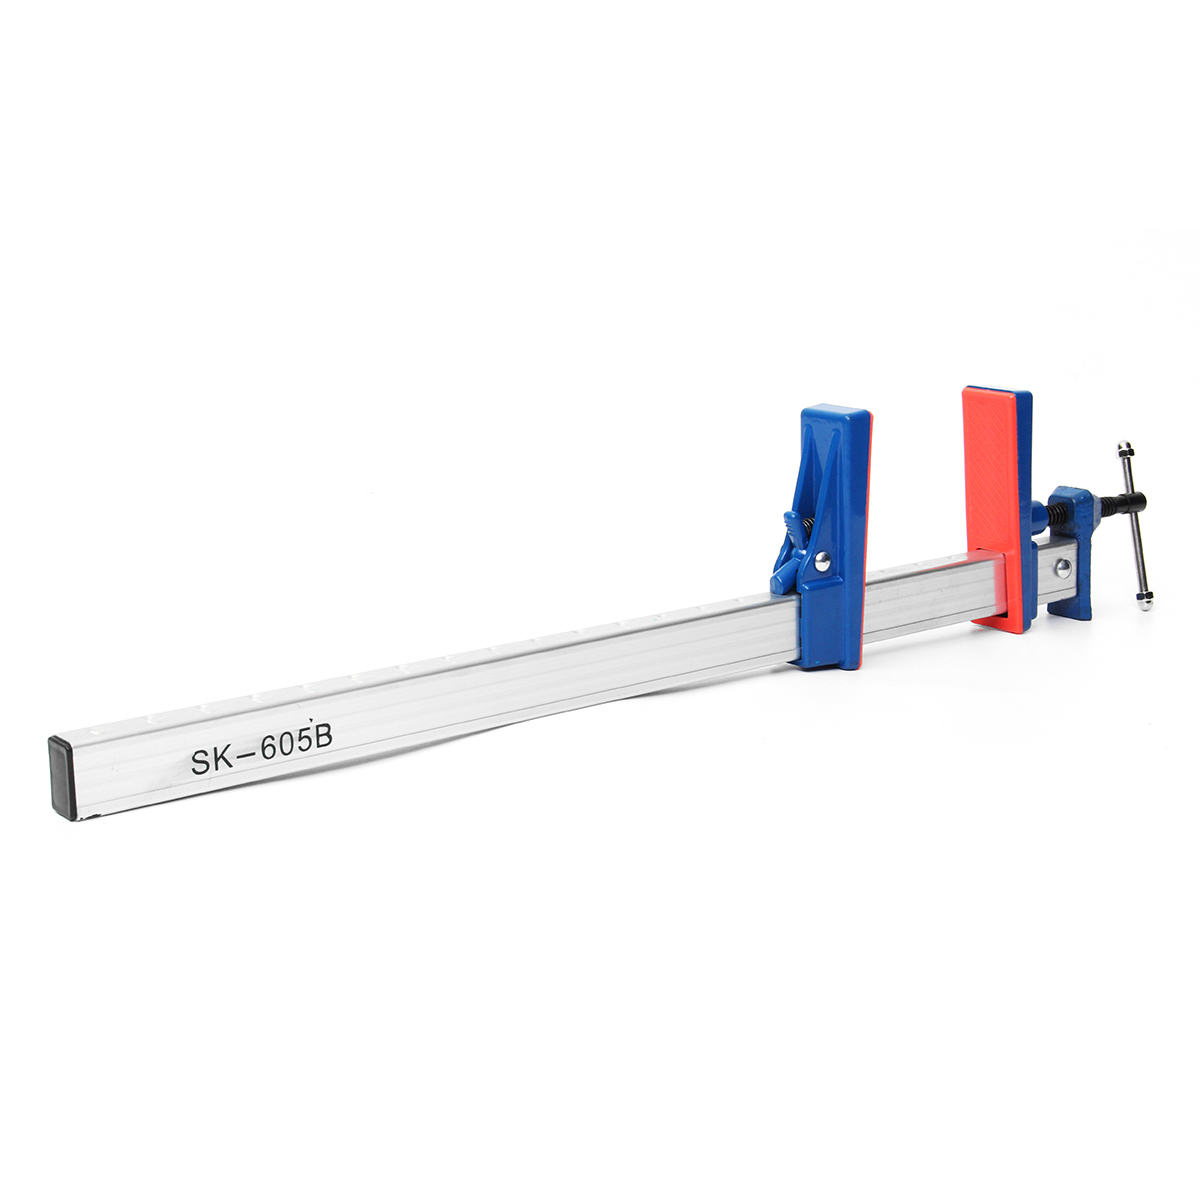 2436-Inch-Aluminum-F-Clamp-Bar-Heavy-Duty-Holder-Grip-Release-Parallel-Adjustable-Woodworking-Tool-1361735